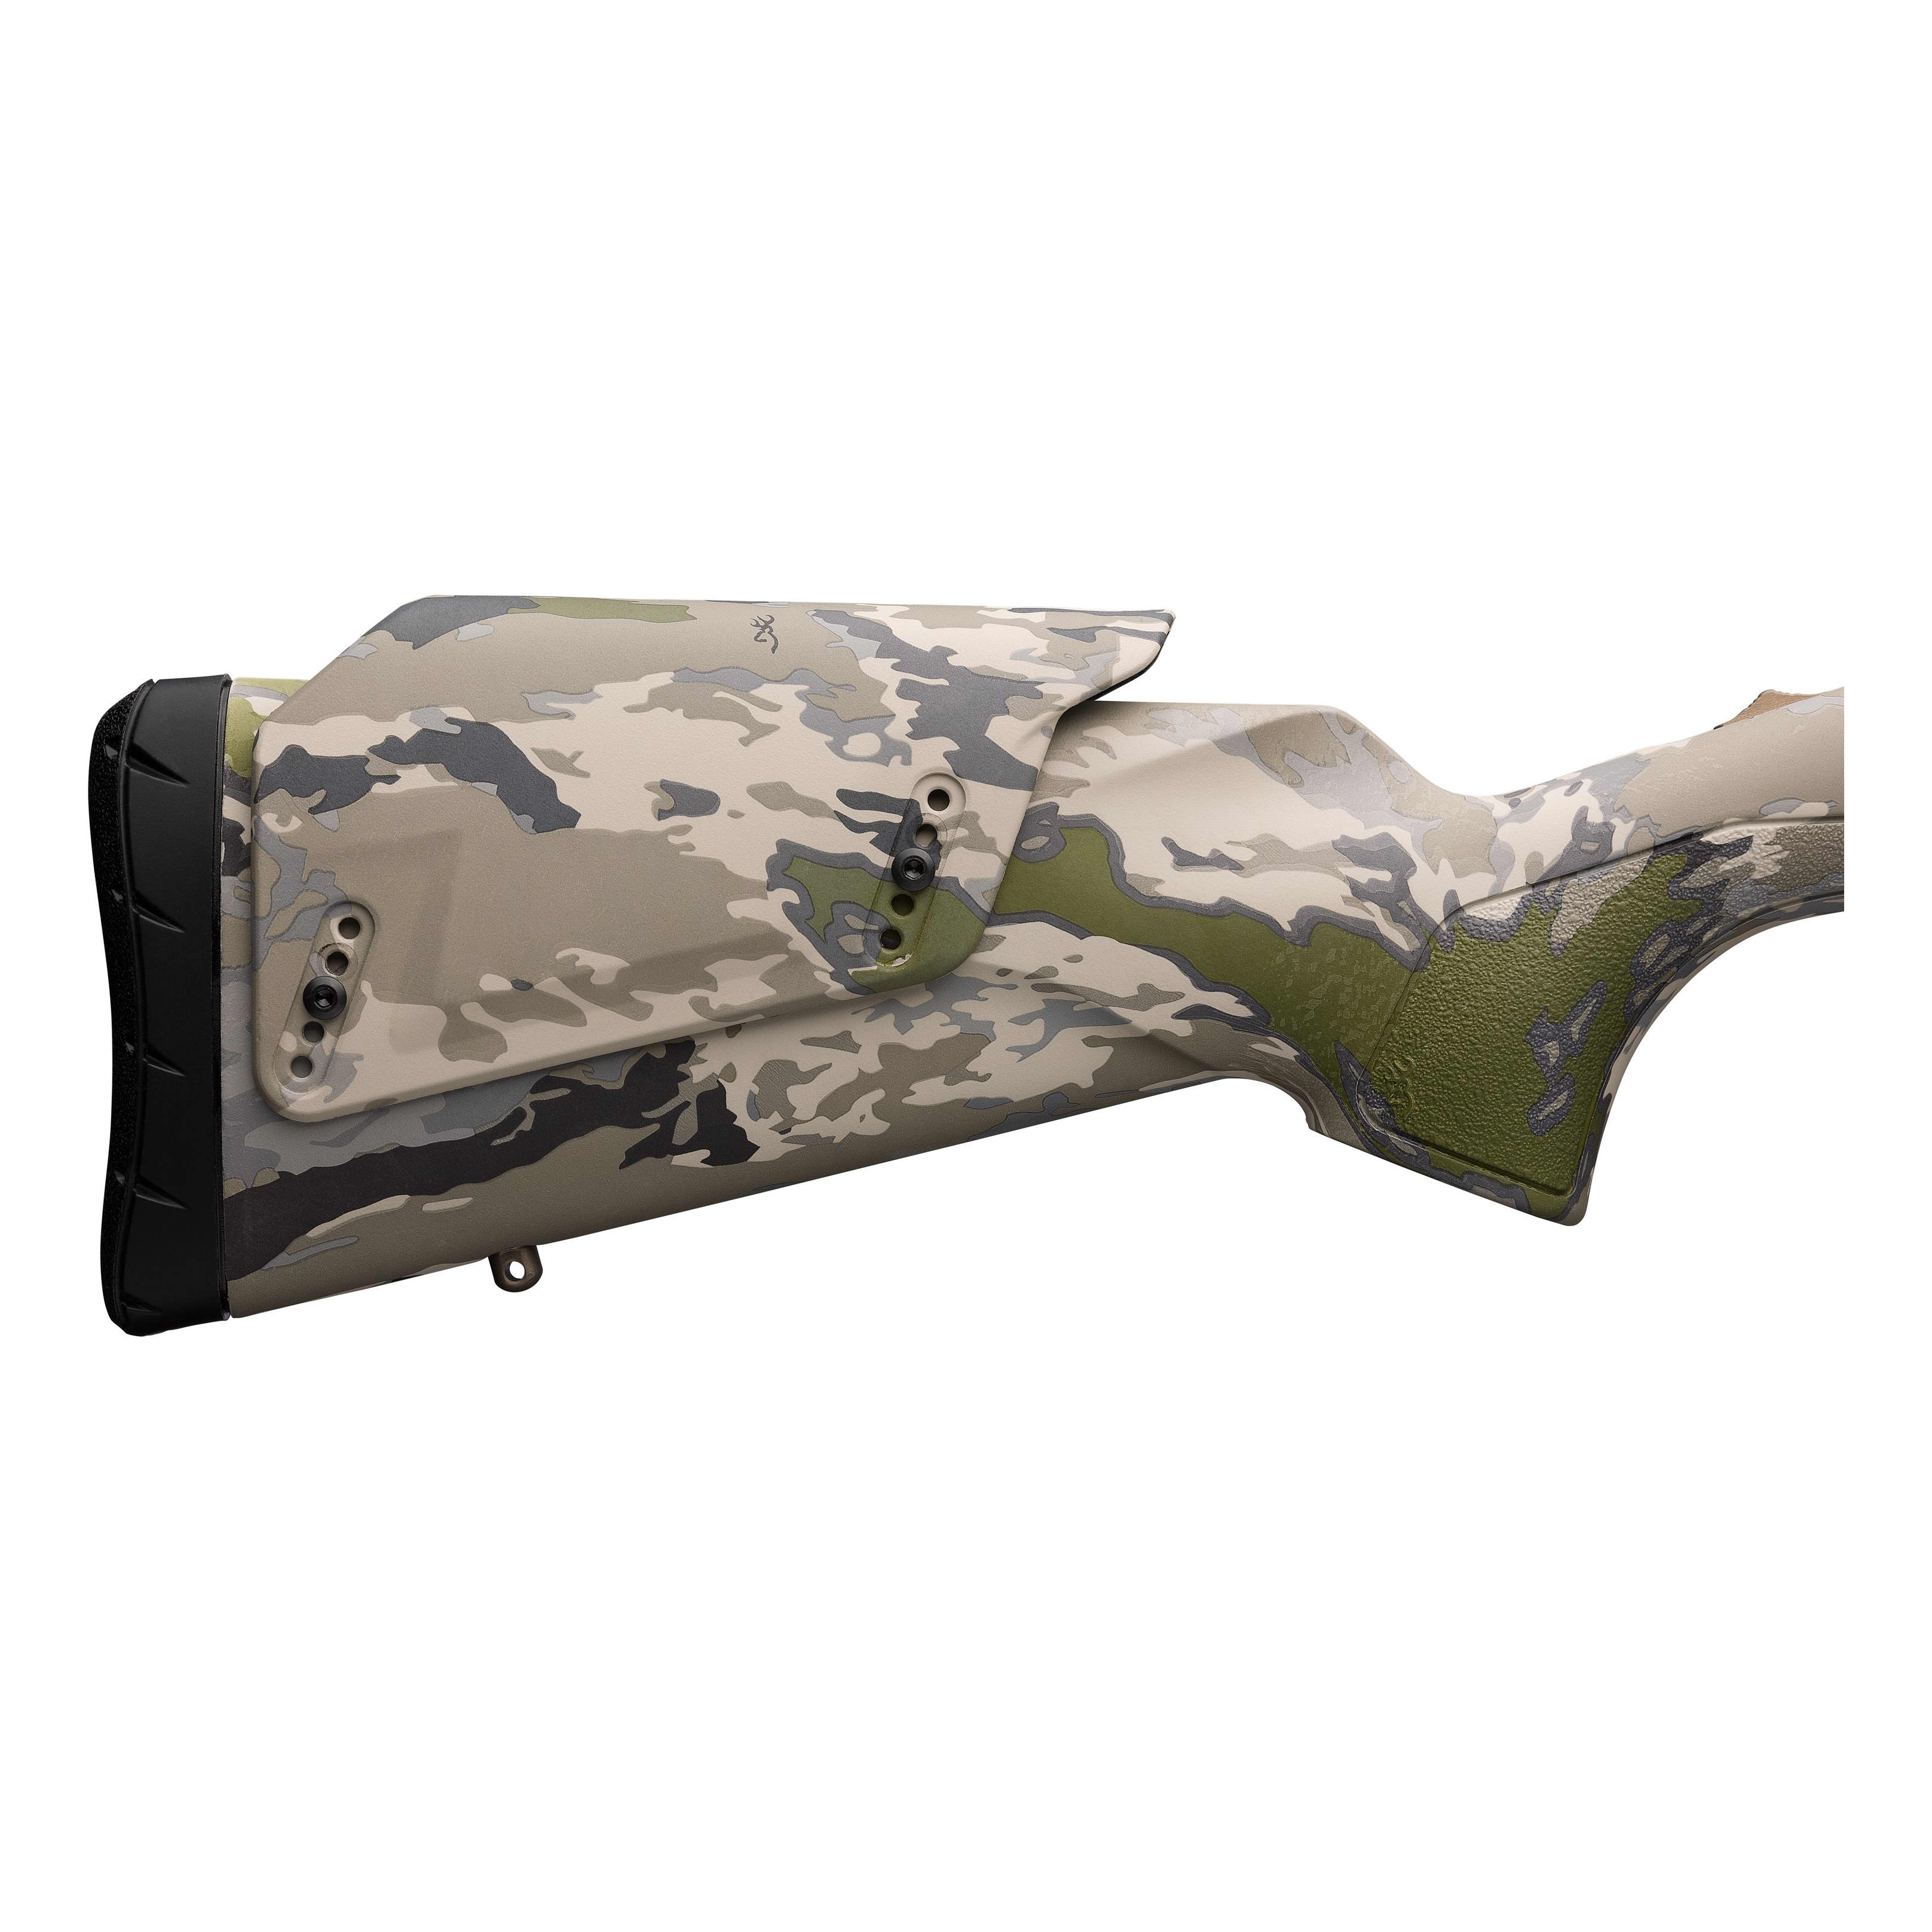 Browning® X-Bolt Speed Long Range Bolt-Action Rifle